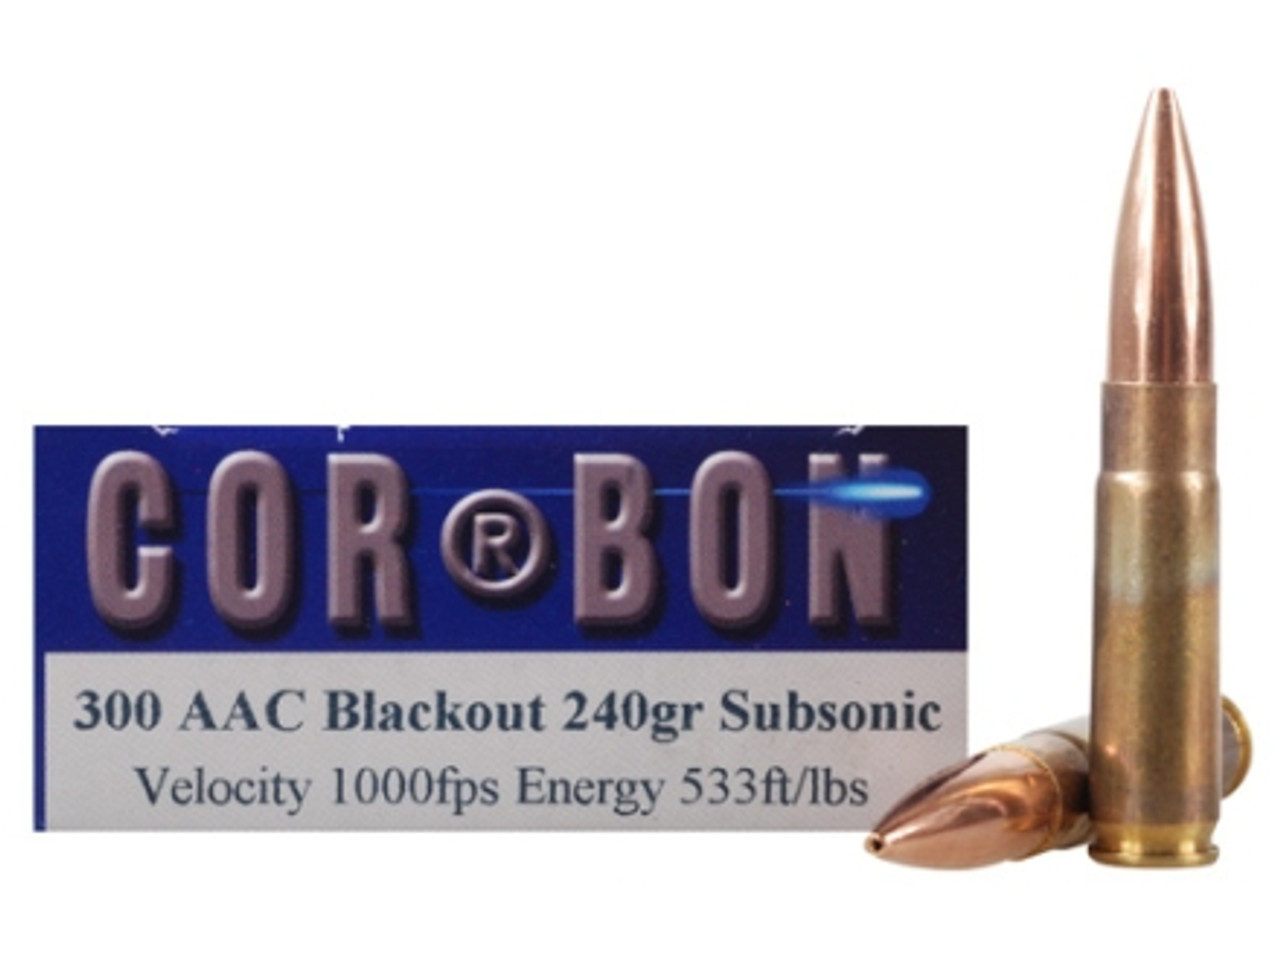 ceap 300 blackout subsonic ammo for sale